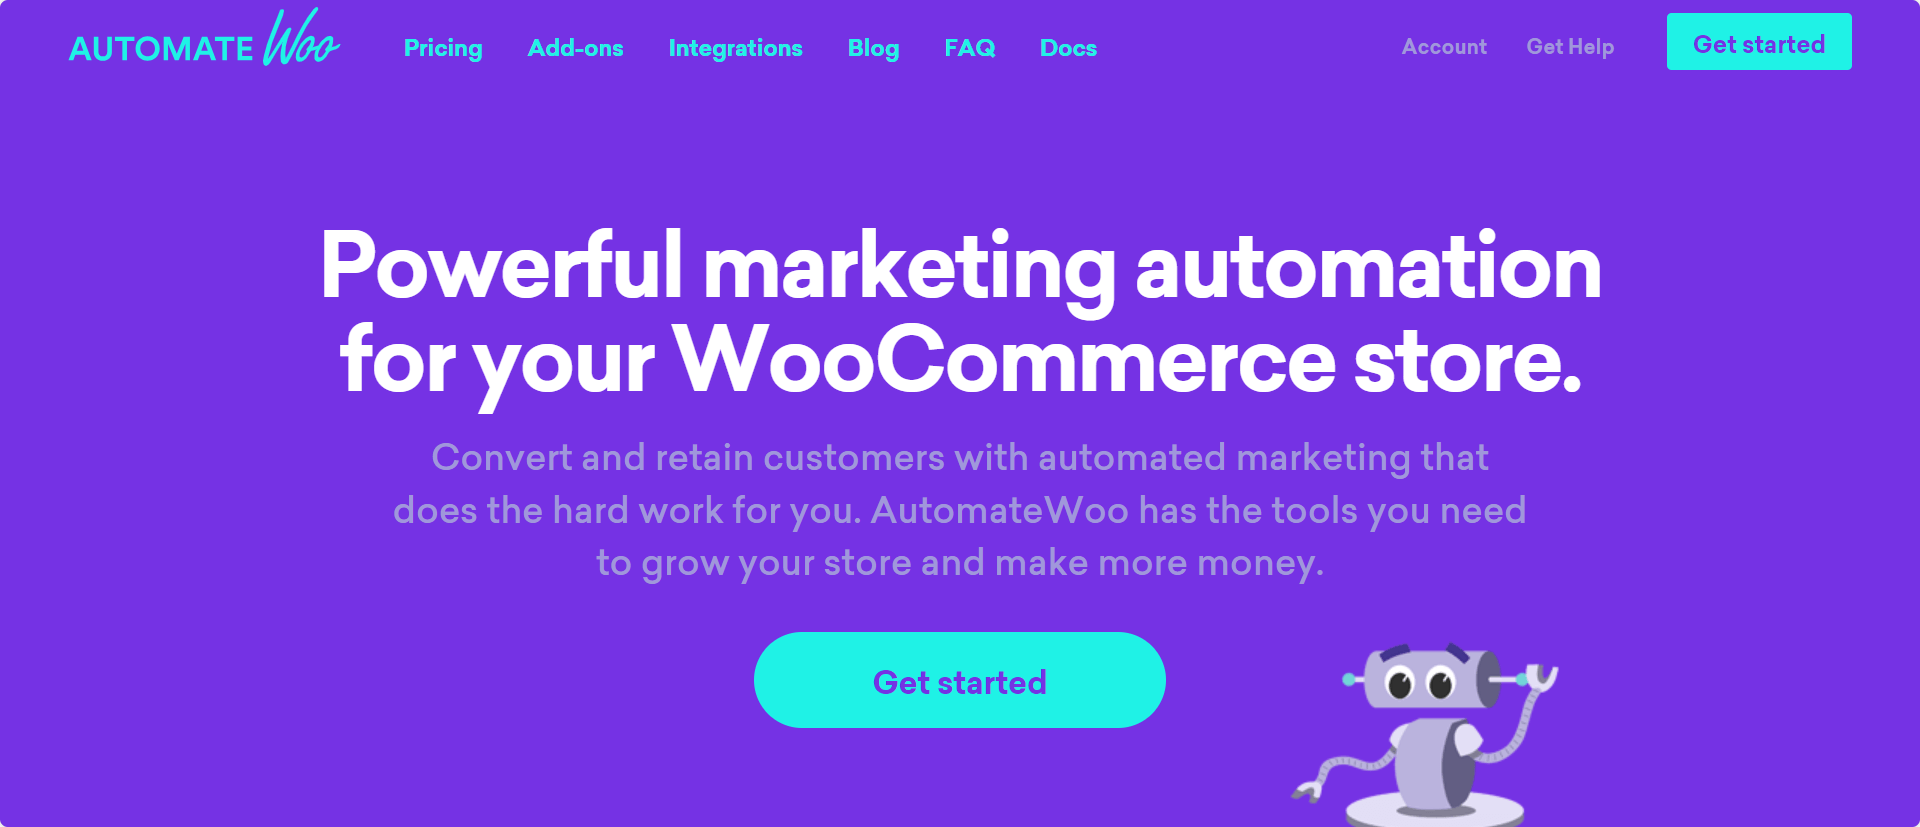 #8 AutomateWoo the best email marketing for WooCommerce